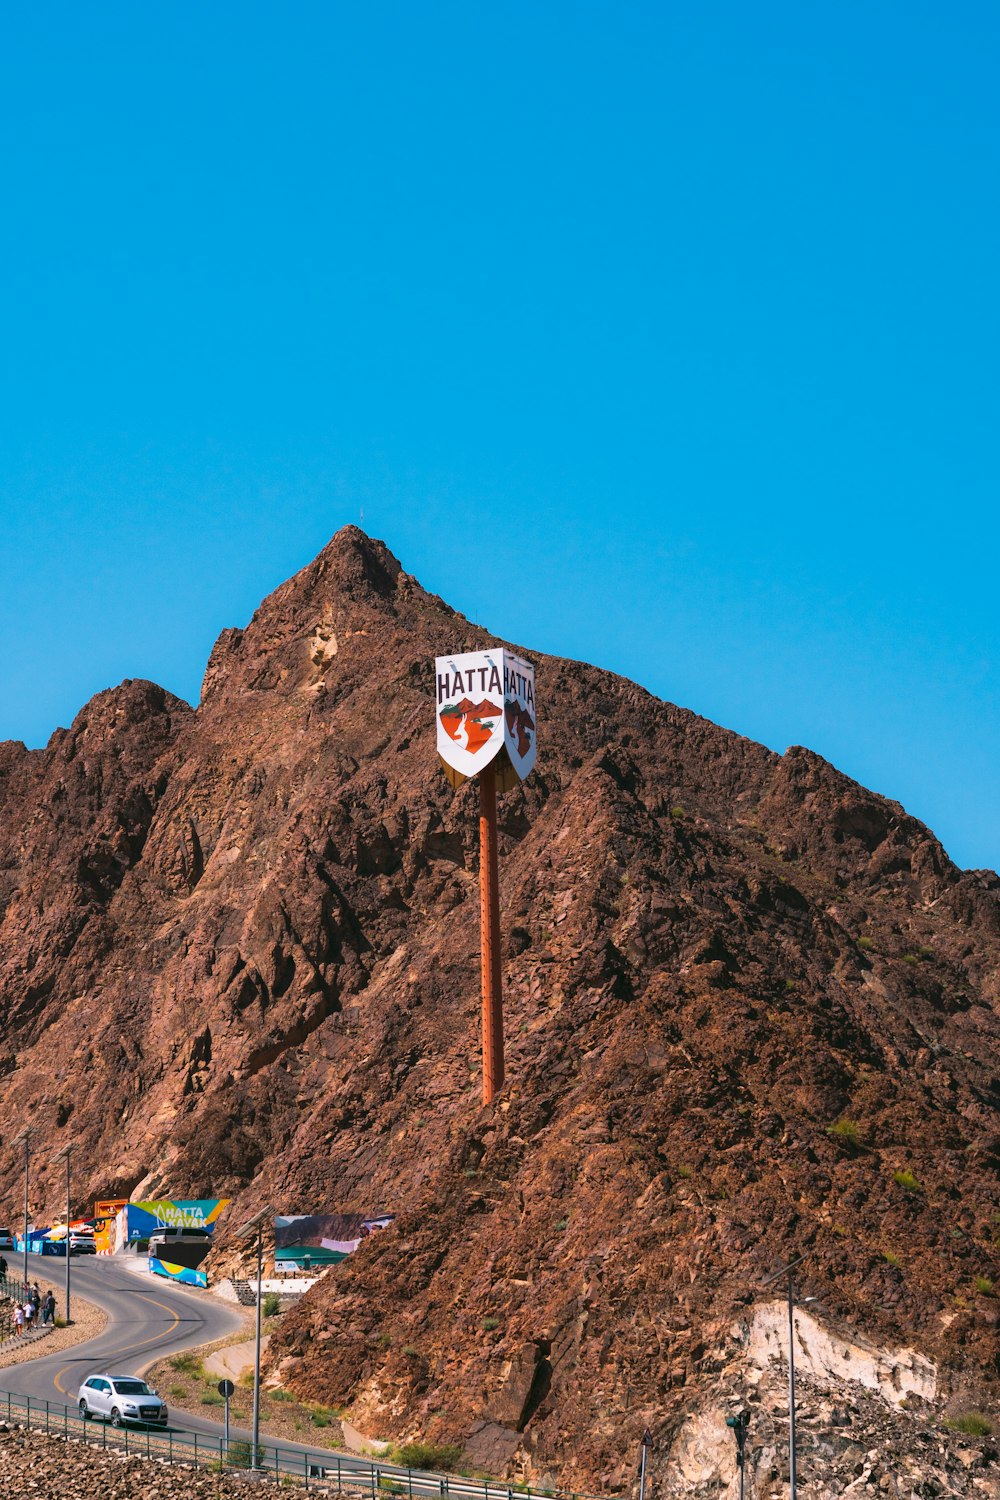 a street sign on a pole in front of a mountain